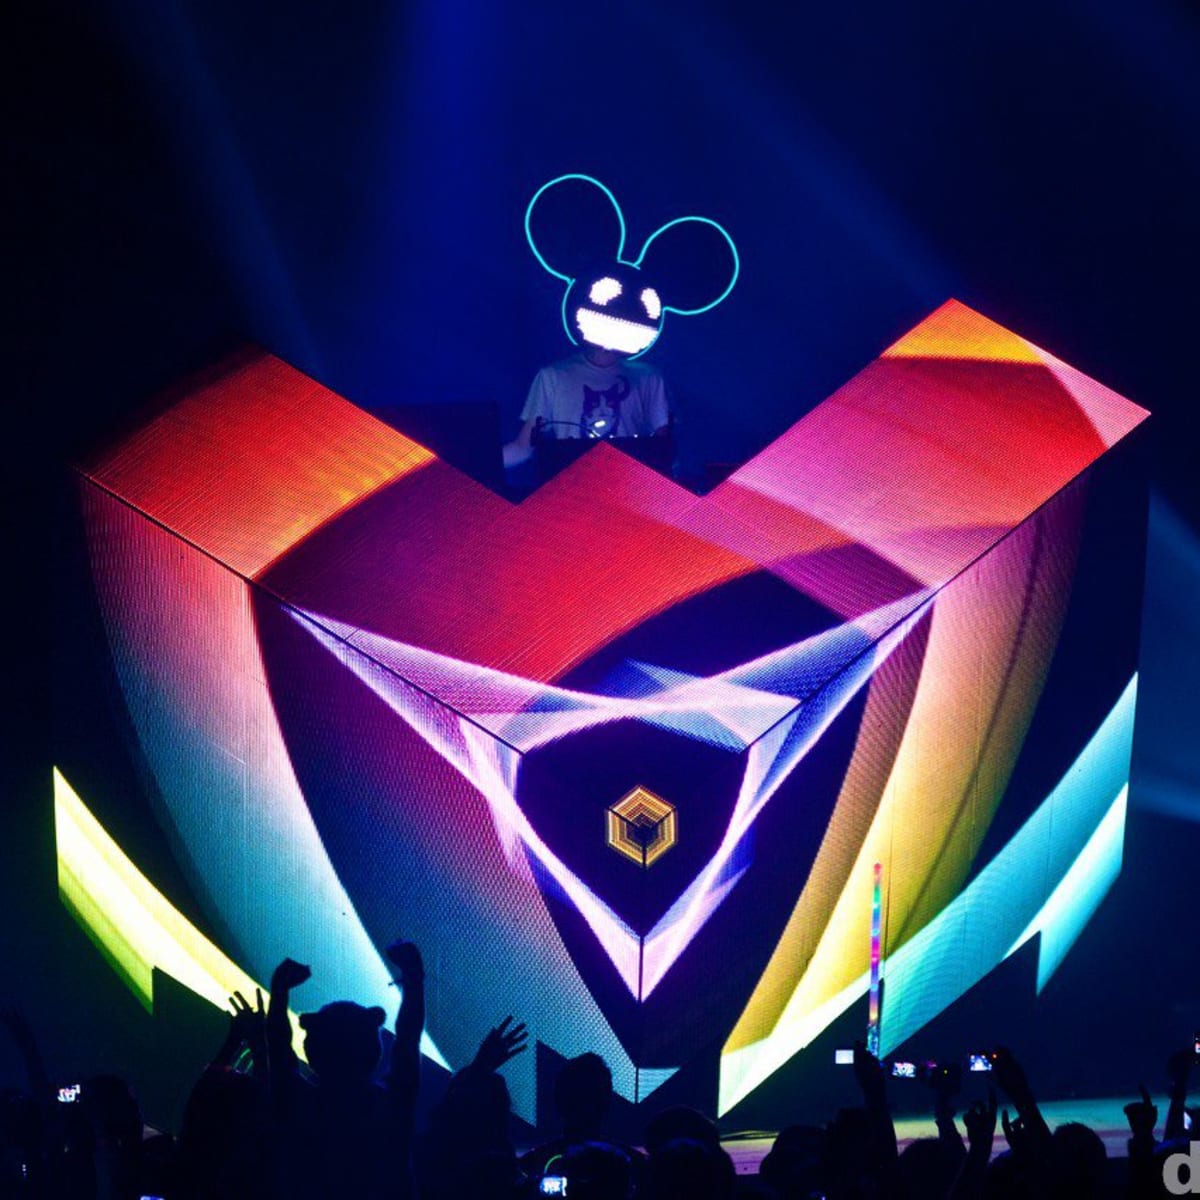 Deadmau5 Drops Vocal Heavy Id During Cubev3 Show At Avant Gardner In Brooklyn Edm Com The Latest Electronic Dance Music News Reviews Artists - deadmau5 tour cube update roblox